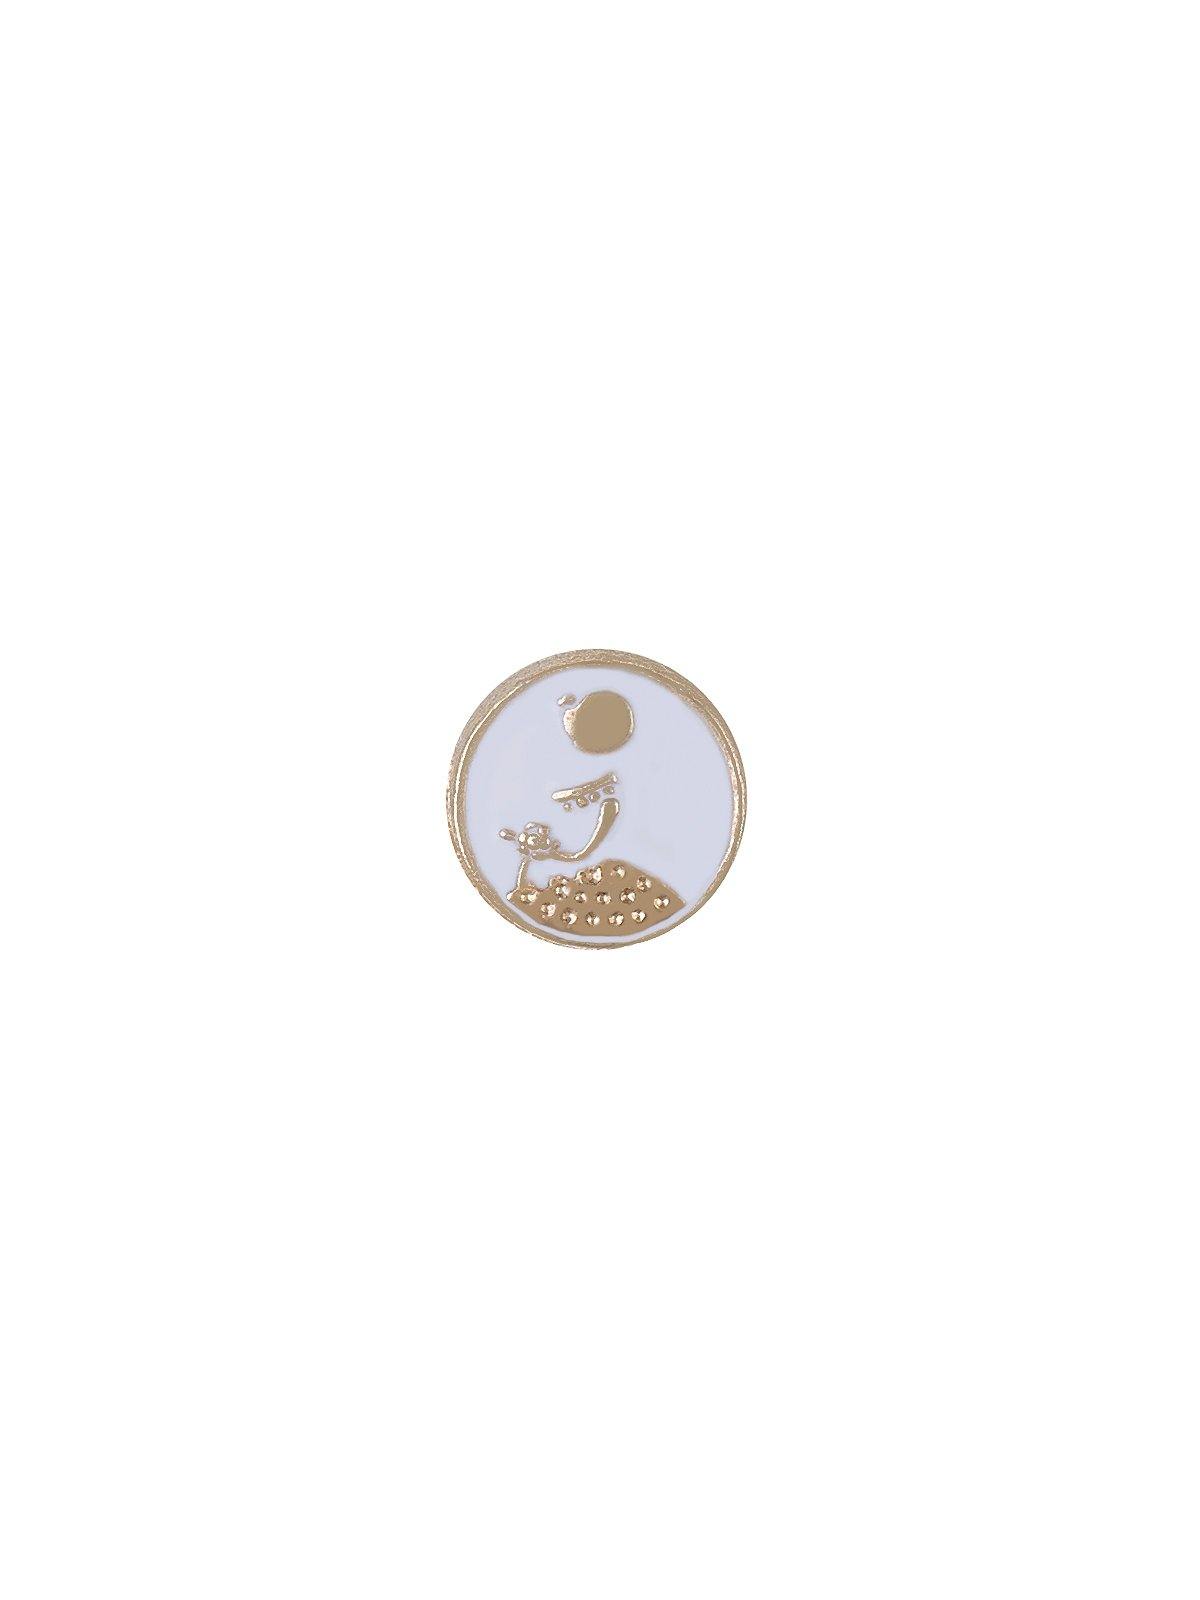 Simple Design Golden with White Shank Metal Button